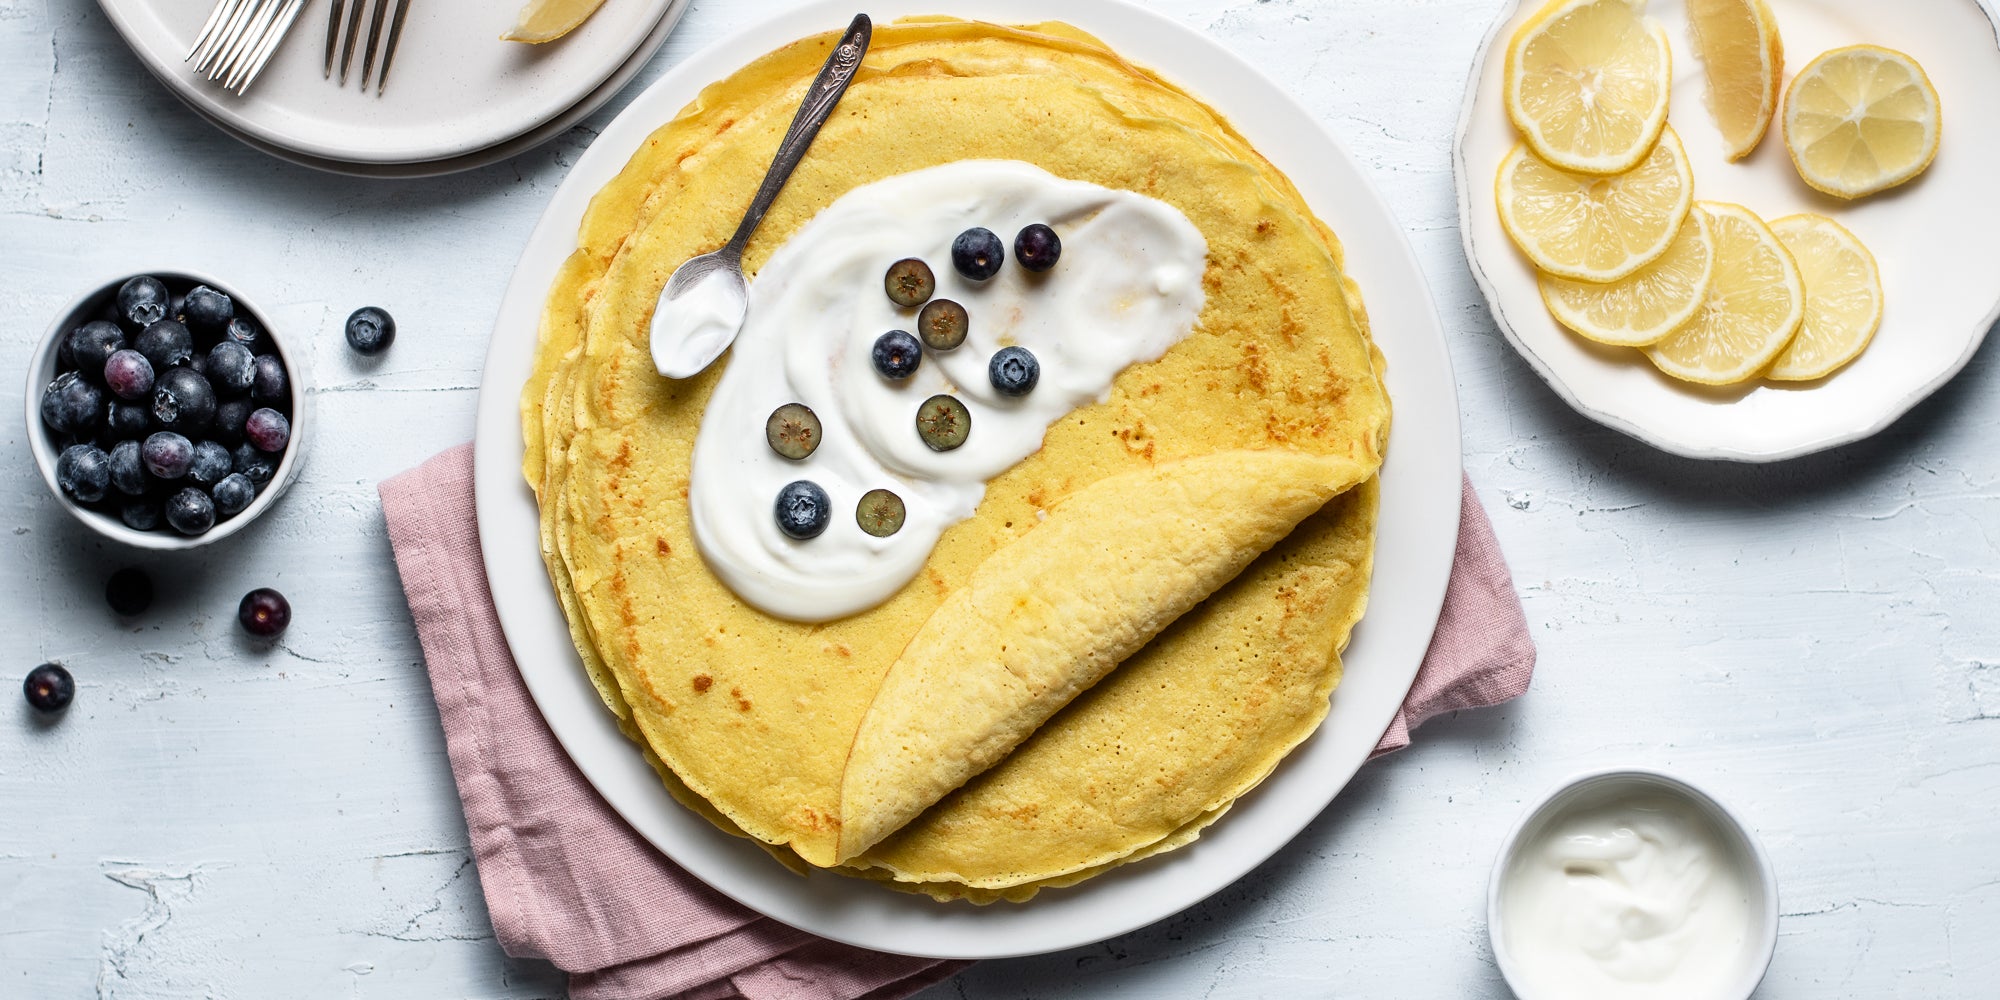 Top down view of yoghurt smothered onto a turmeric and lemon pancake and blueberries sprinkled on top